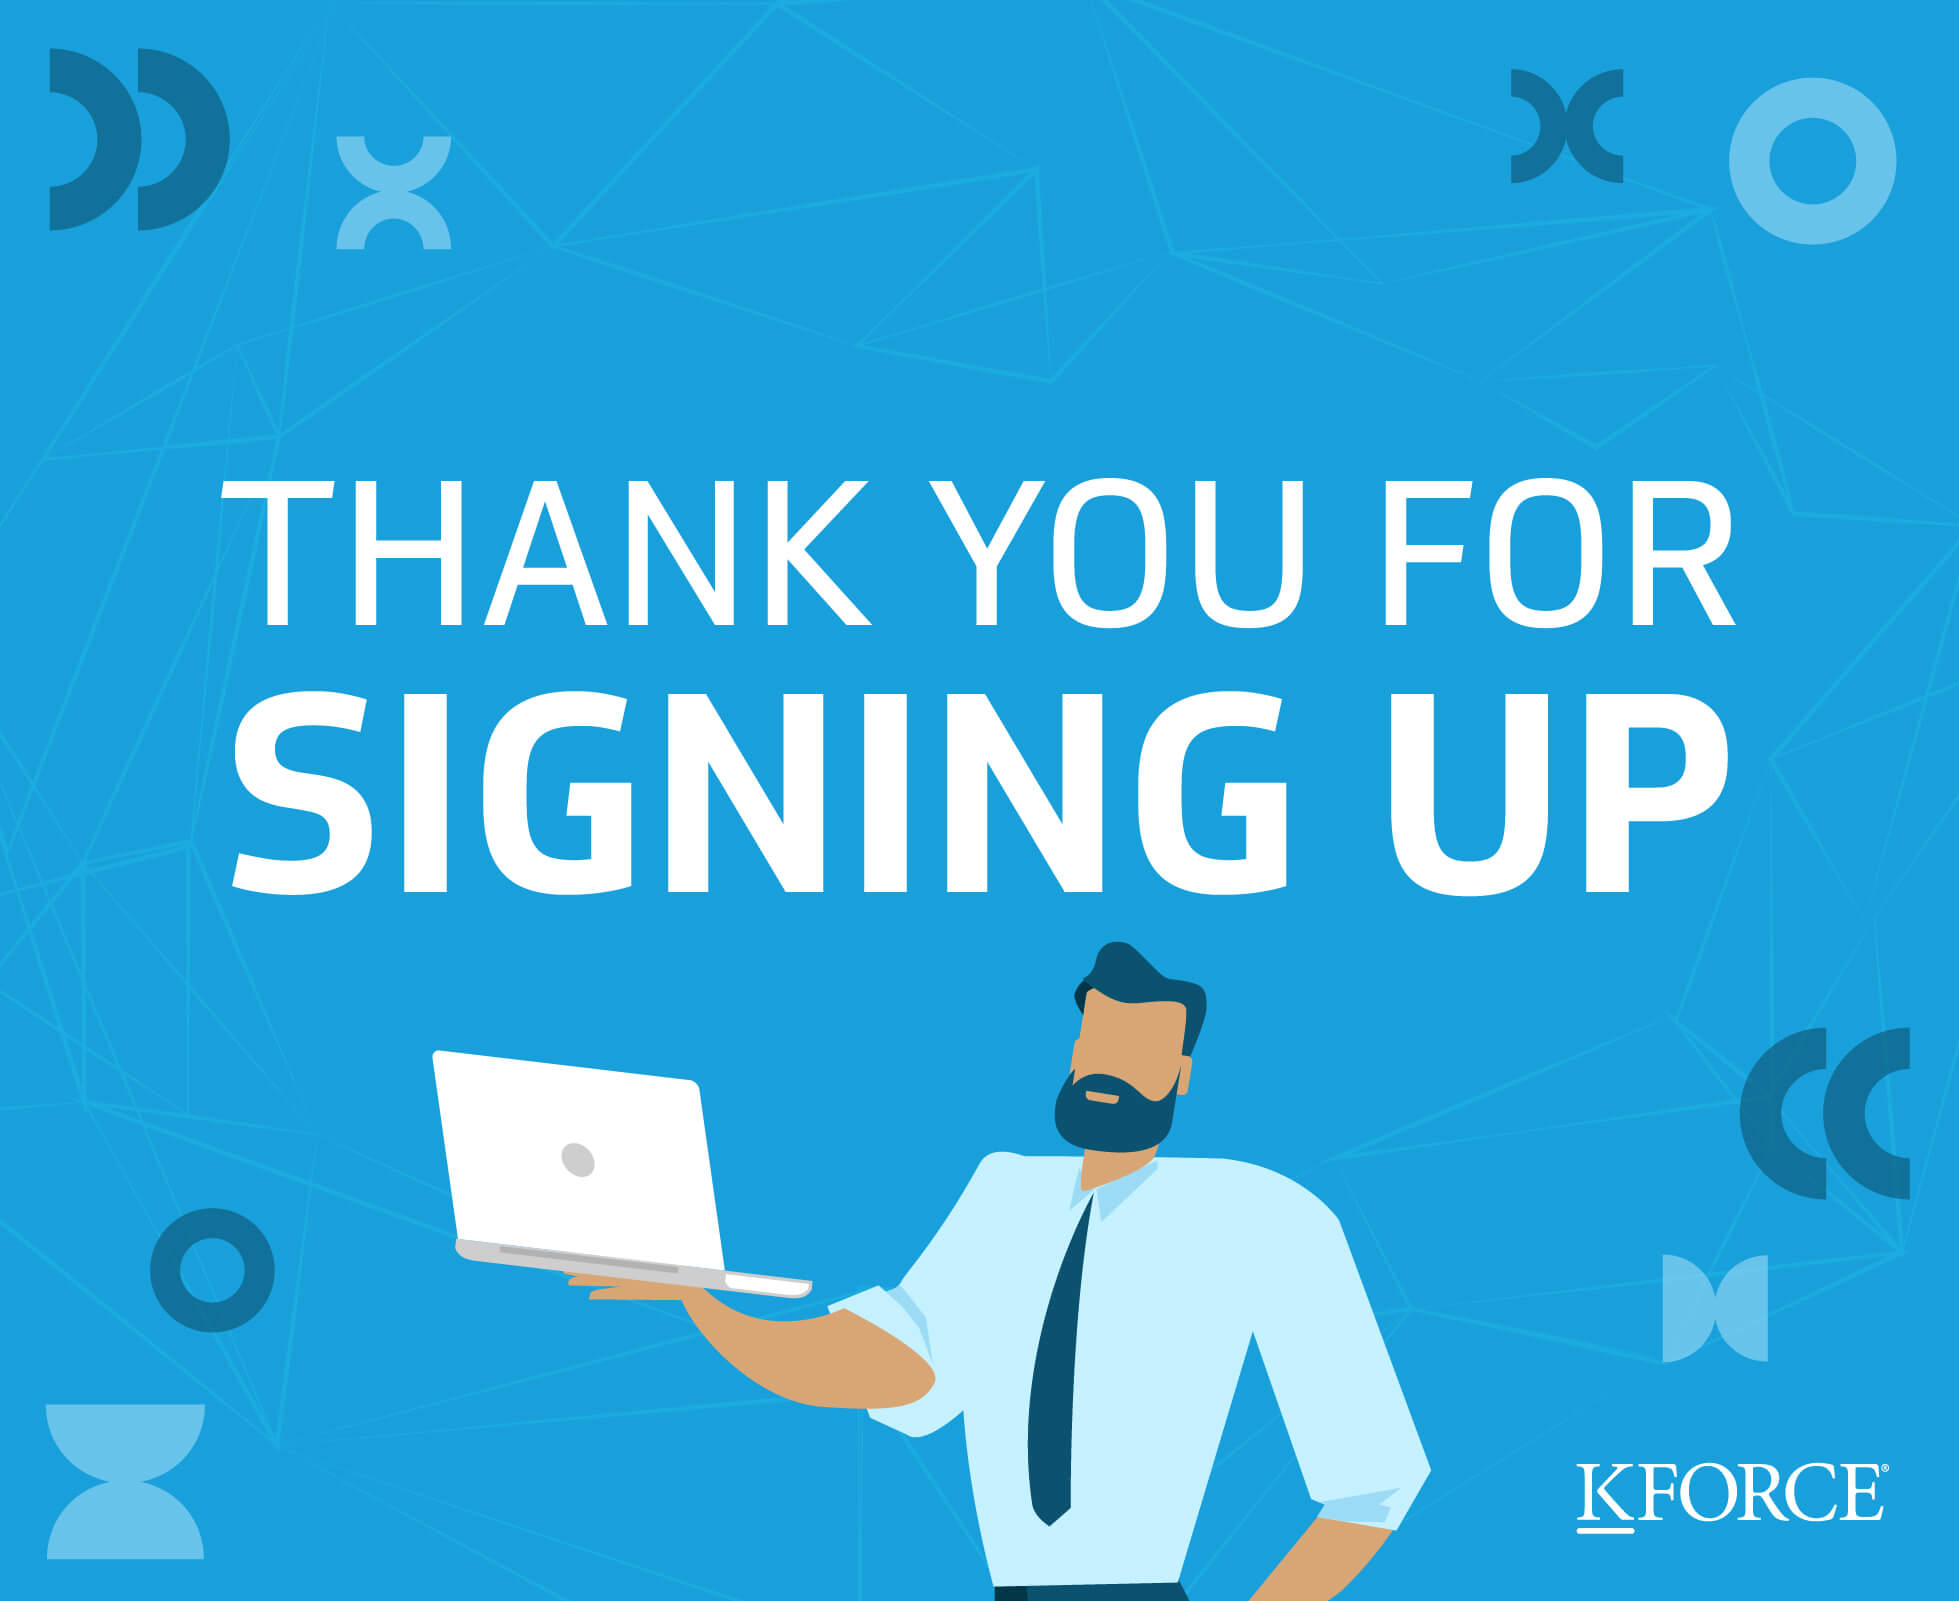 Thank you for signing up